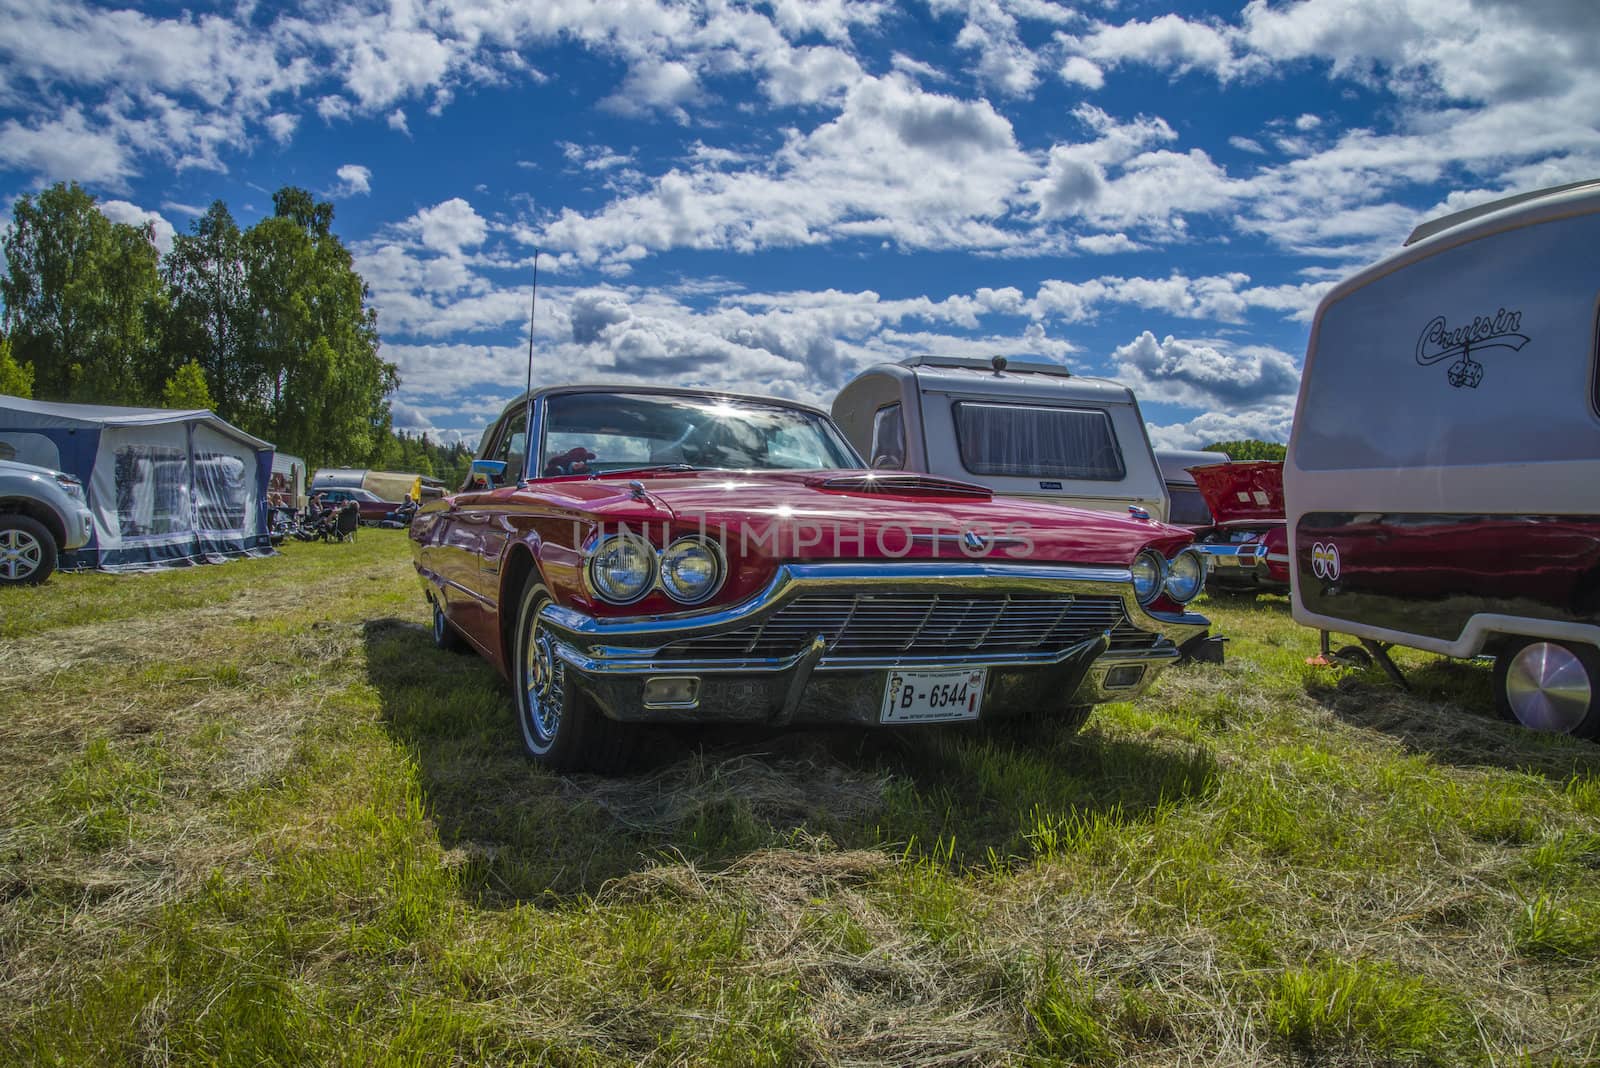 Classic Amcar, 1965 Ford Thunderbird, T-bird. The image is shot by Dawn at the Farm in Halden, Norway.